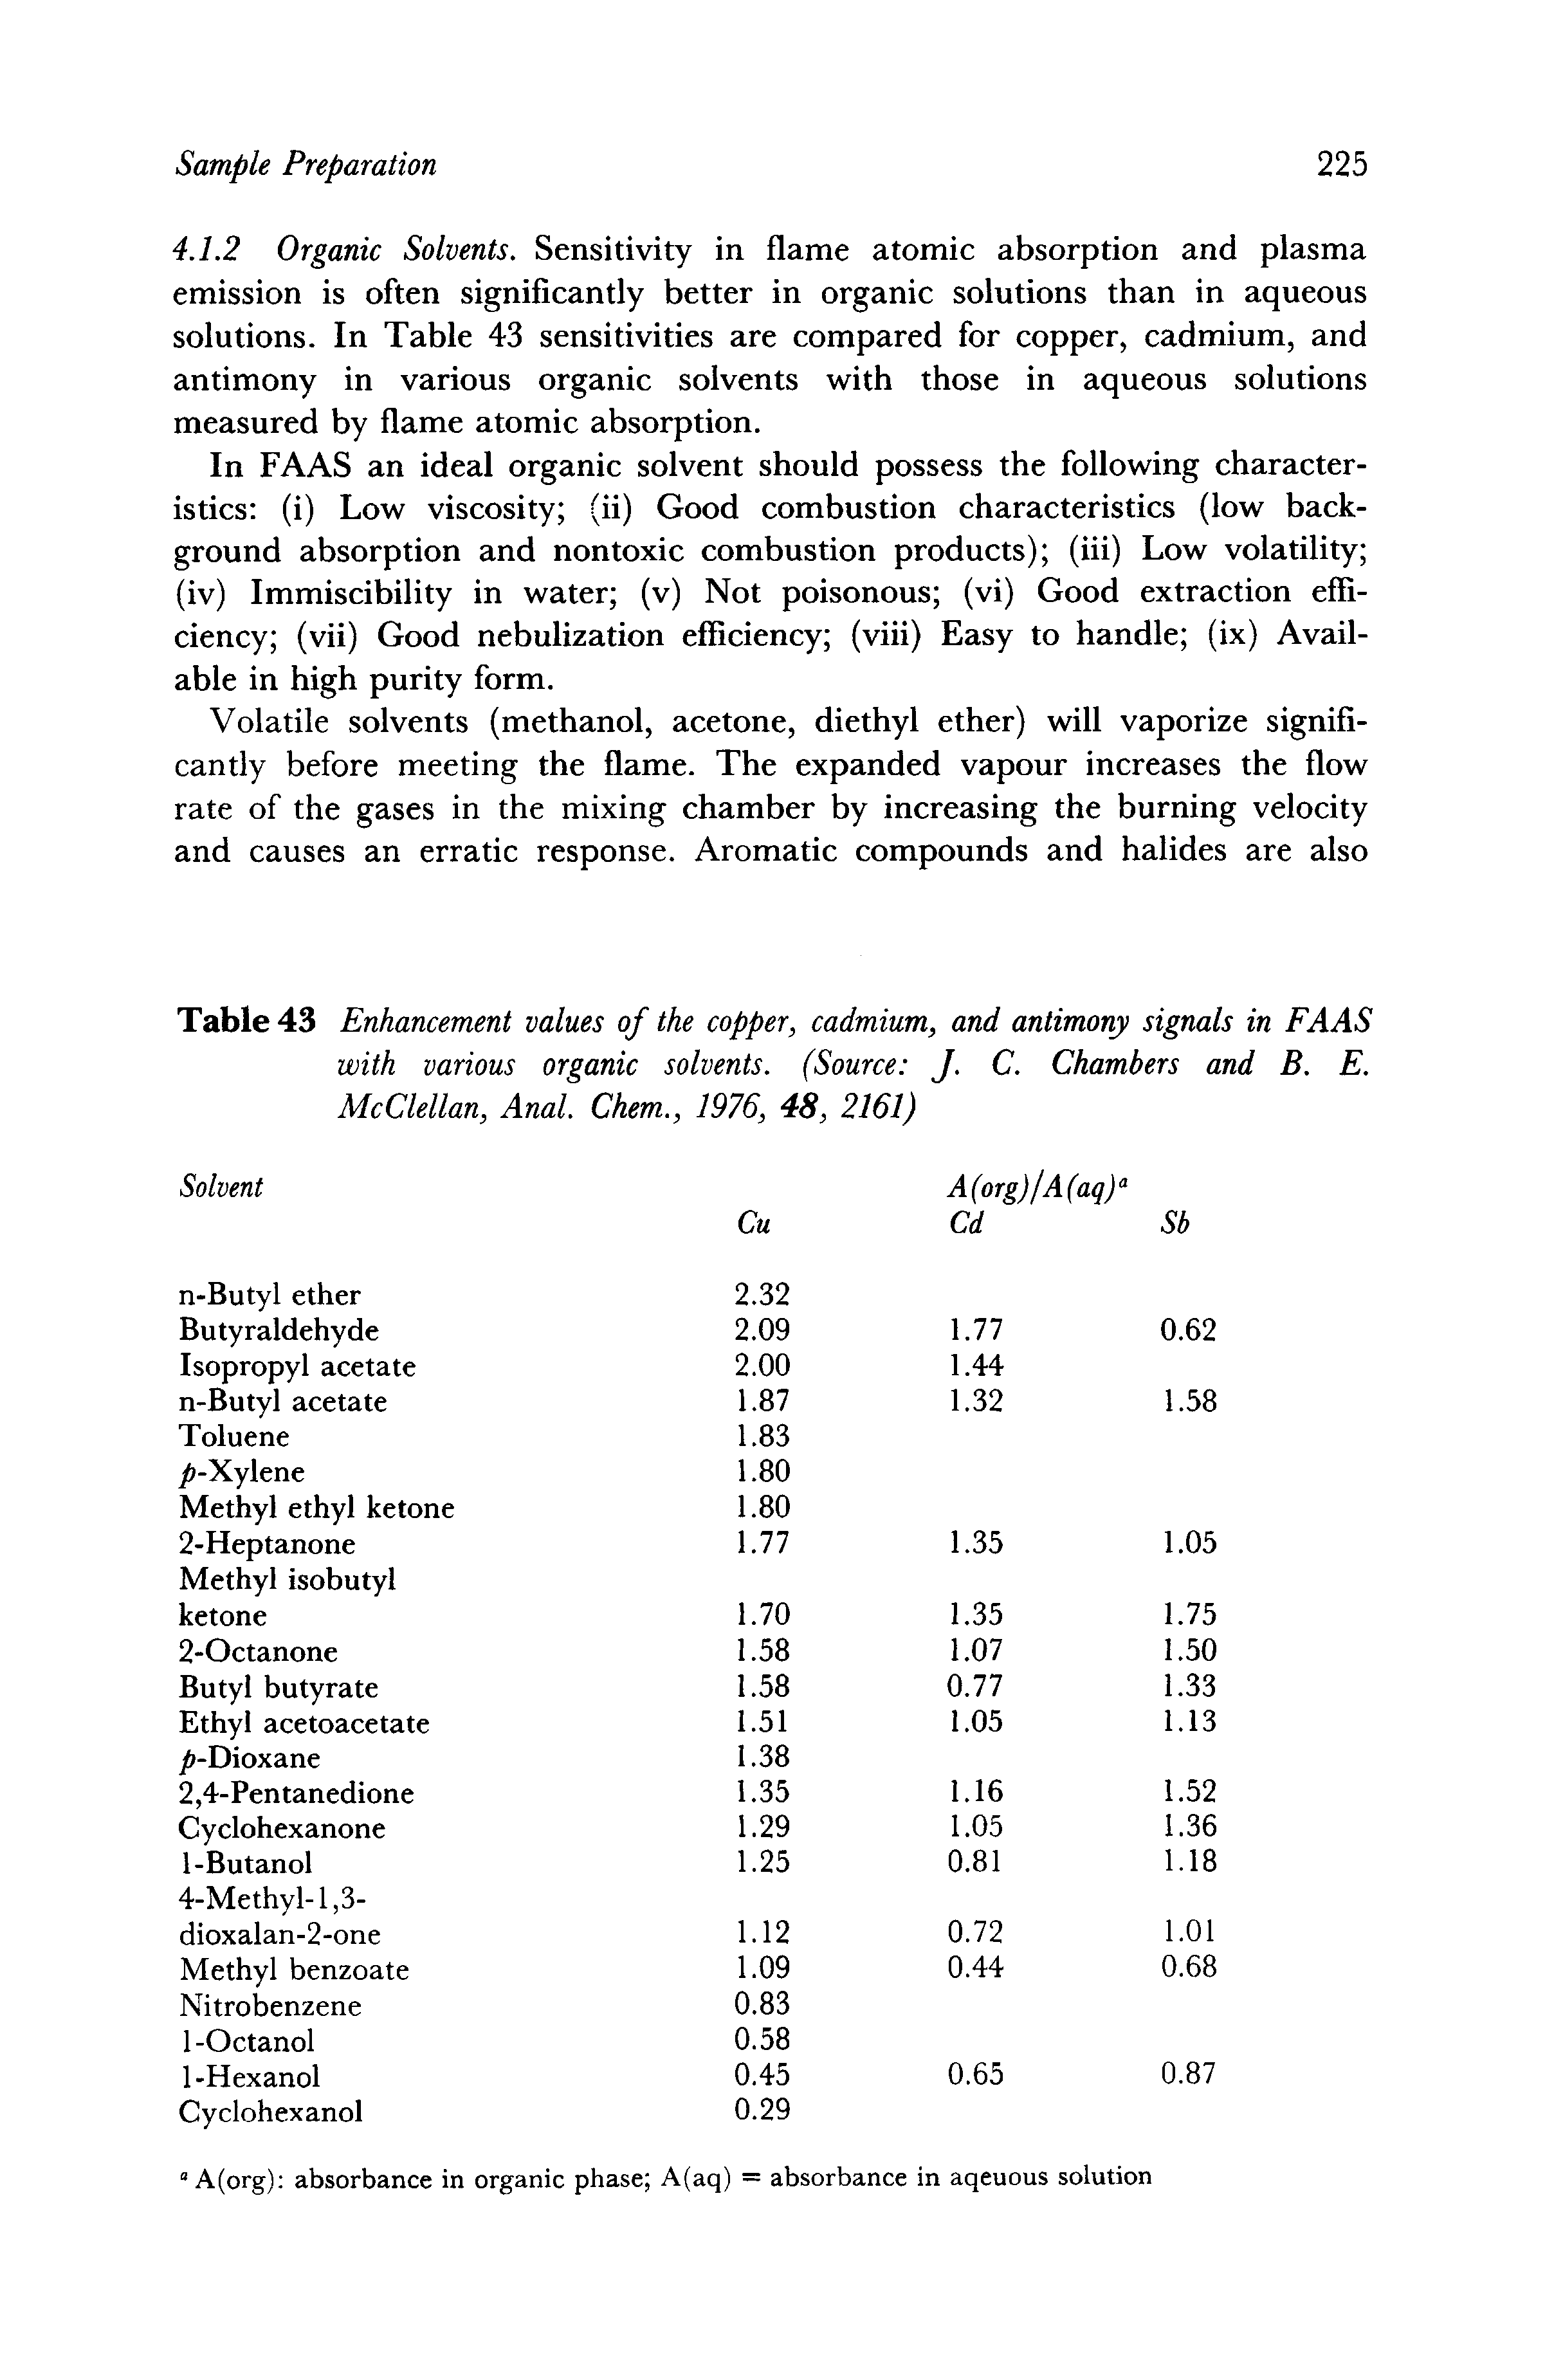 Table 43 Enhancement values of the copper, cadmium, and antimony signals in FAAS with various organic solvents. (Source J. C. Chambers and B. E. McClellan, Anal. Chem., 1976, 48, 2161)...